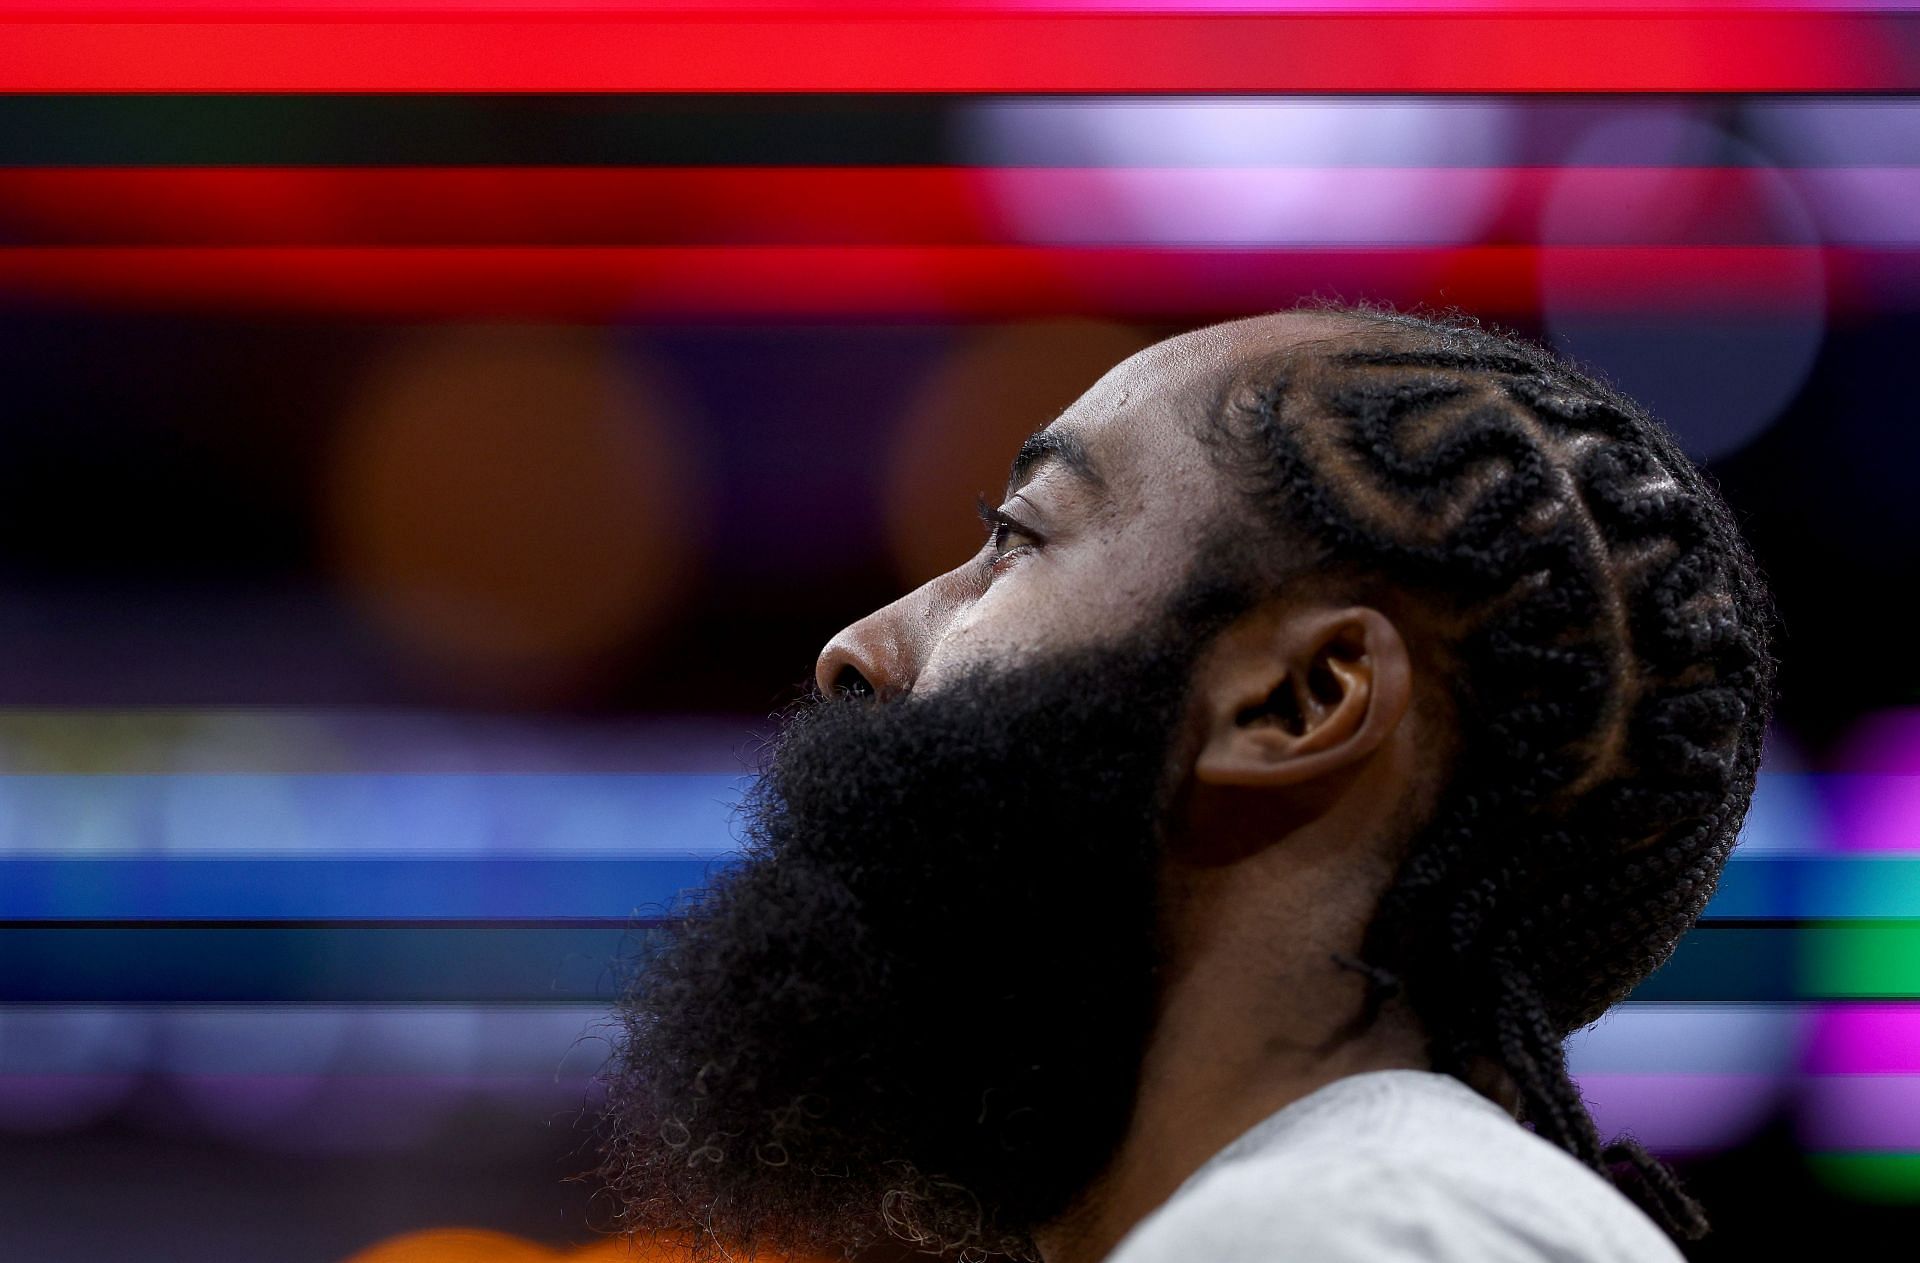 James Harden warms up before the 76ers-Nets game.